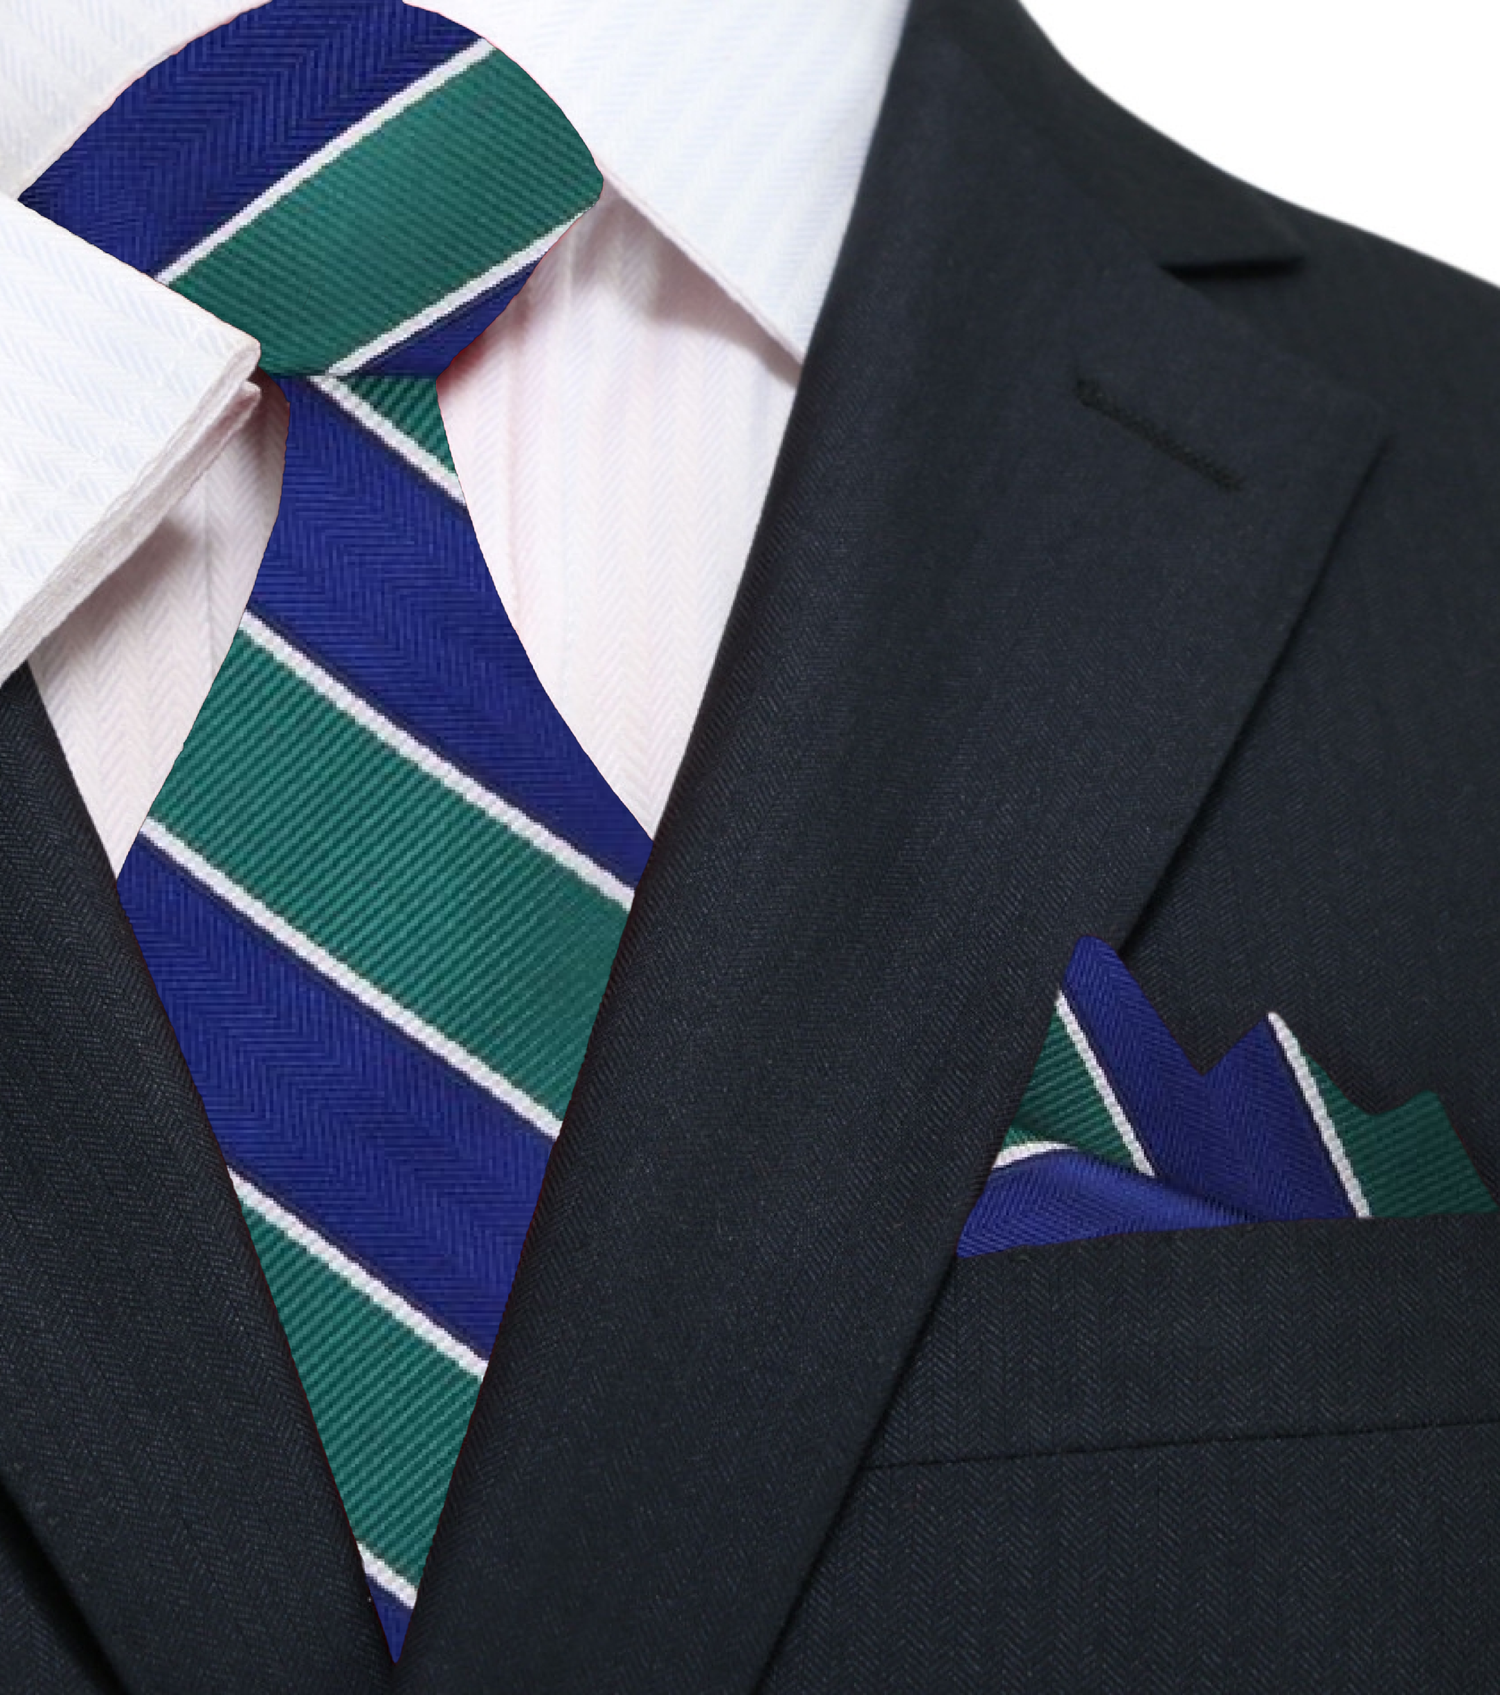 Main View: Teal, Blue Block Stripe Tie and Square